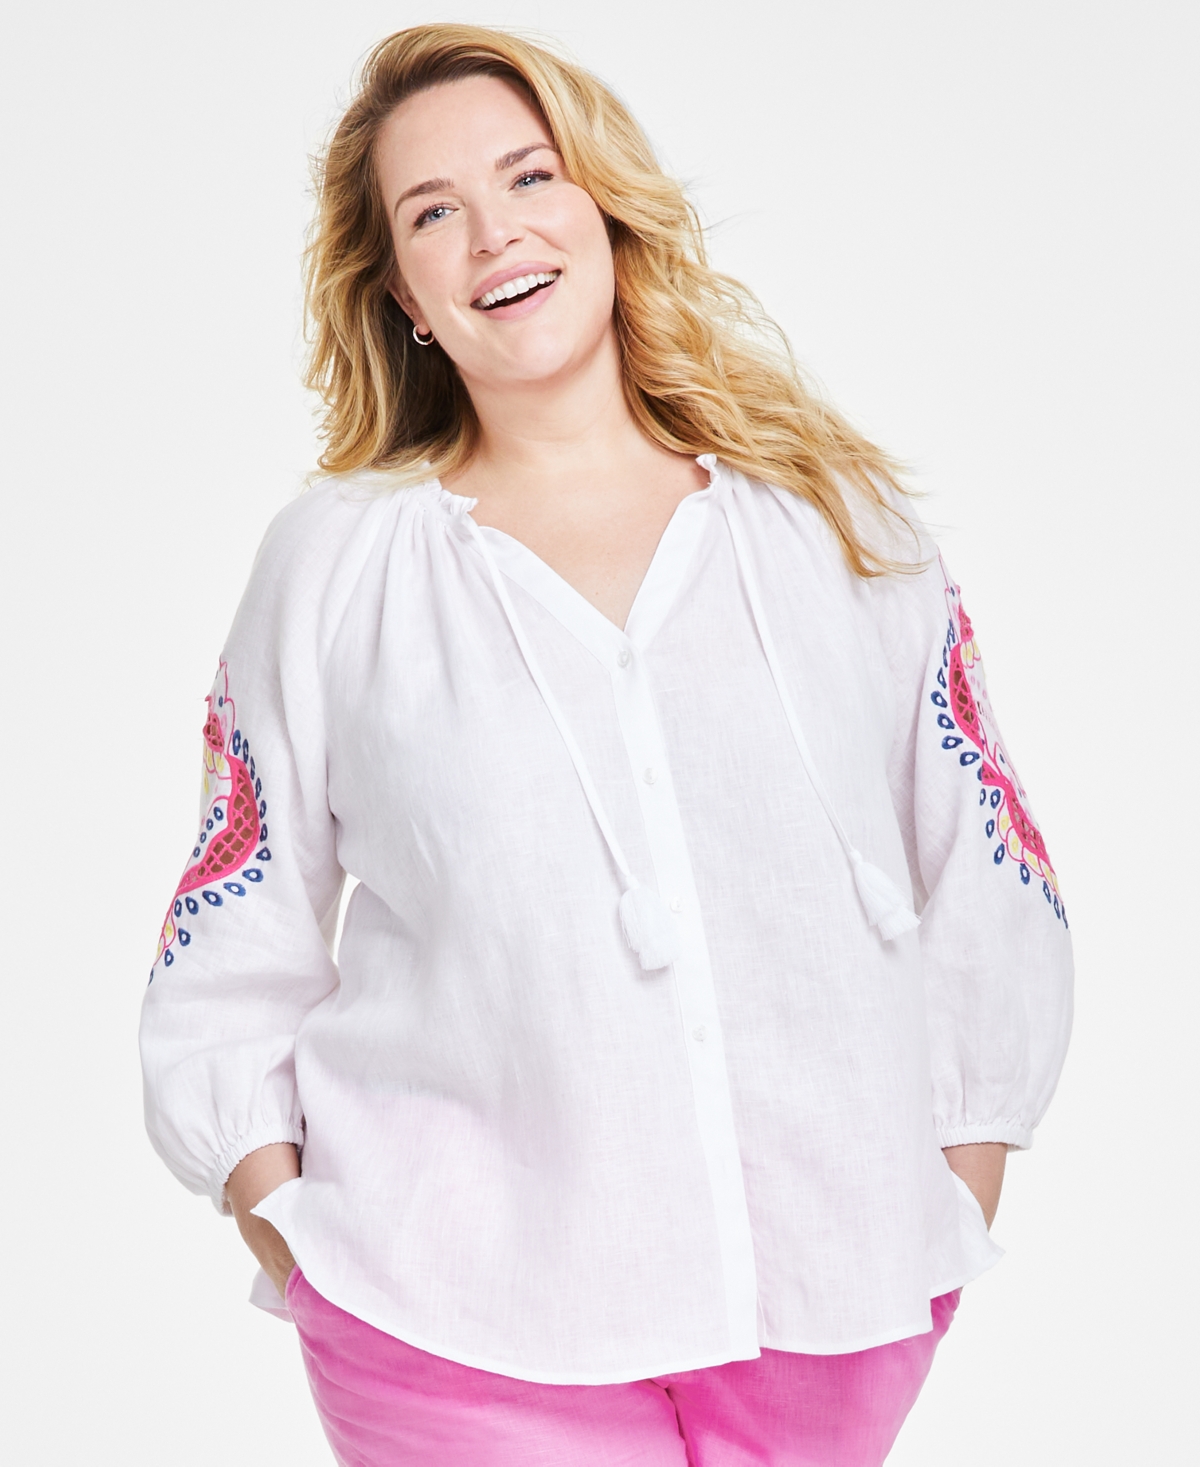 Plus Size Tassel-Tie Open-Embroidery Blouse, Created for Macy's - Bright White